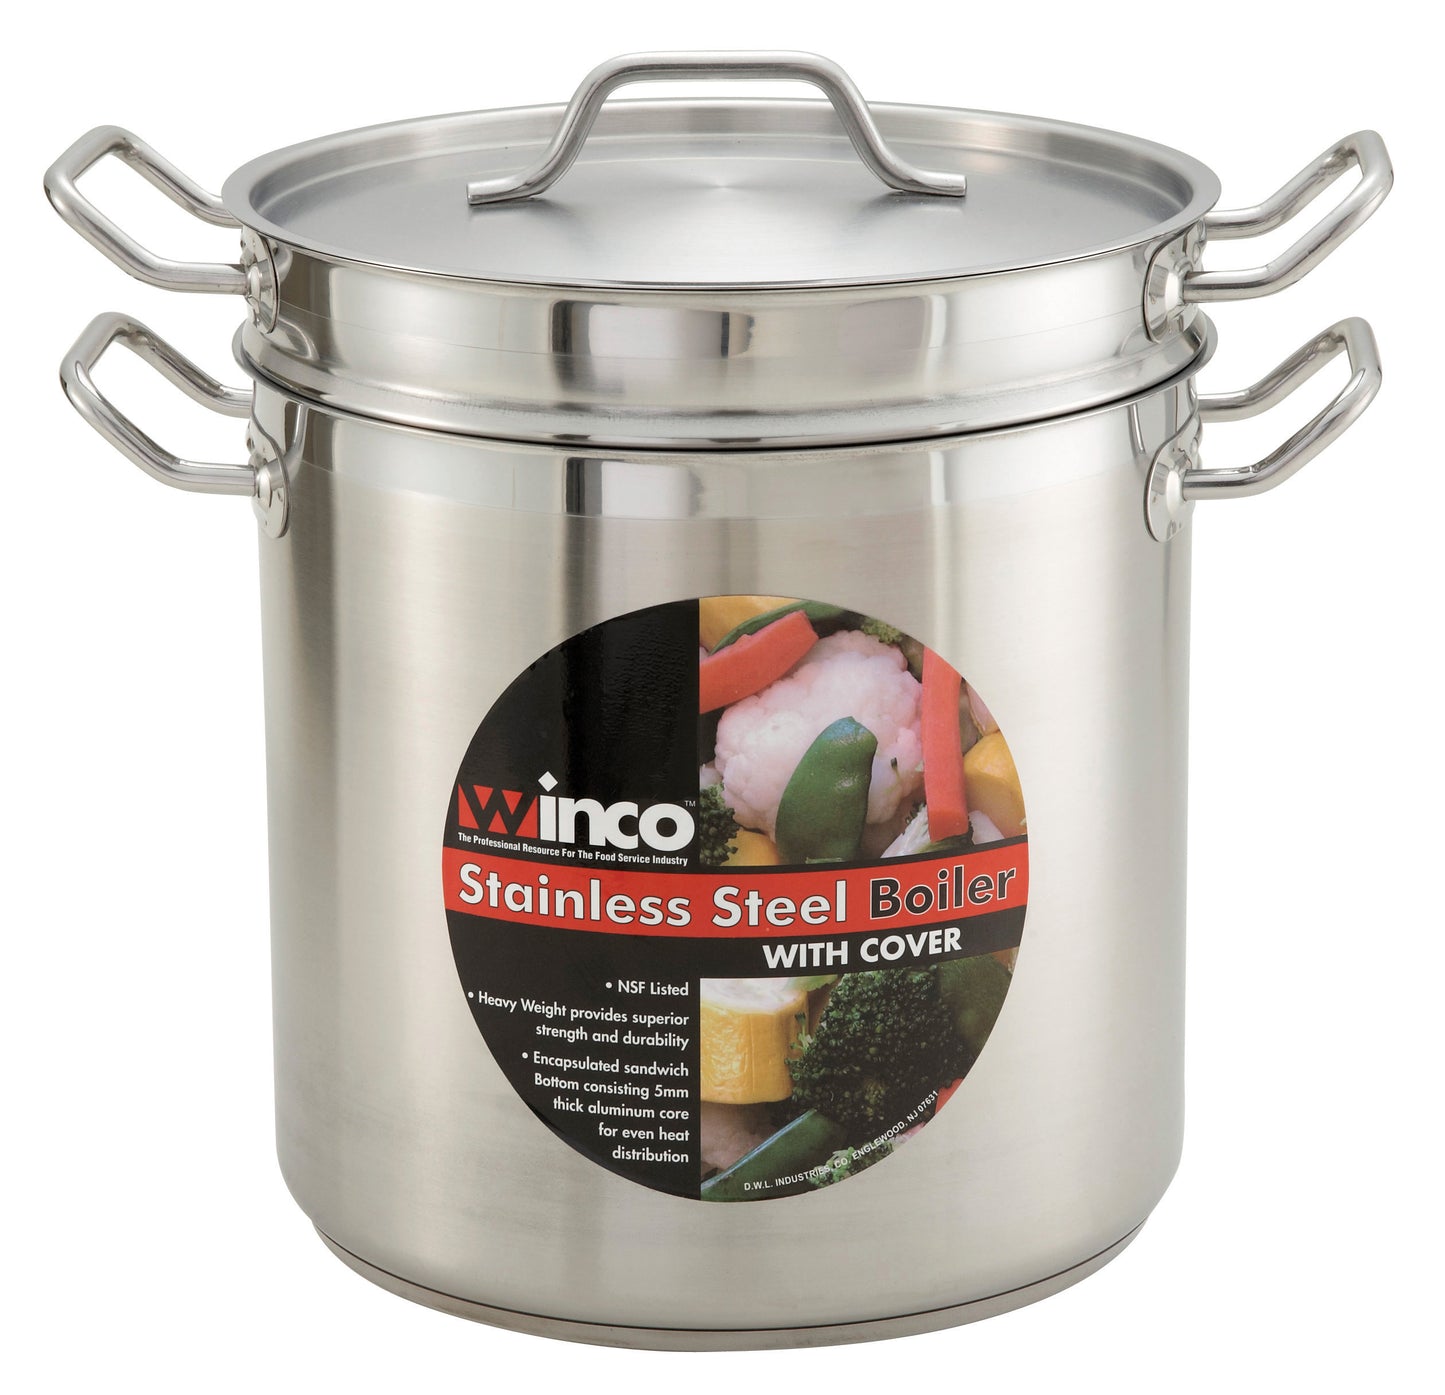 Stainless Steel Double Boiler with Cover - 20 Quart